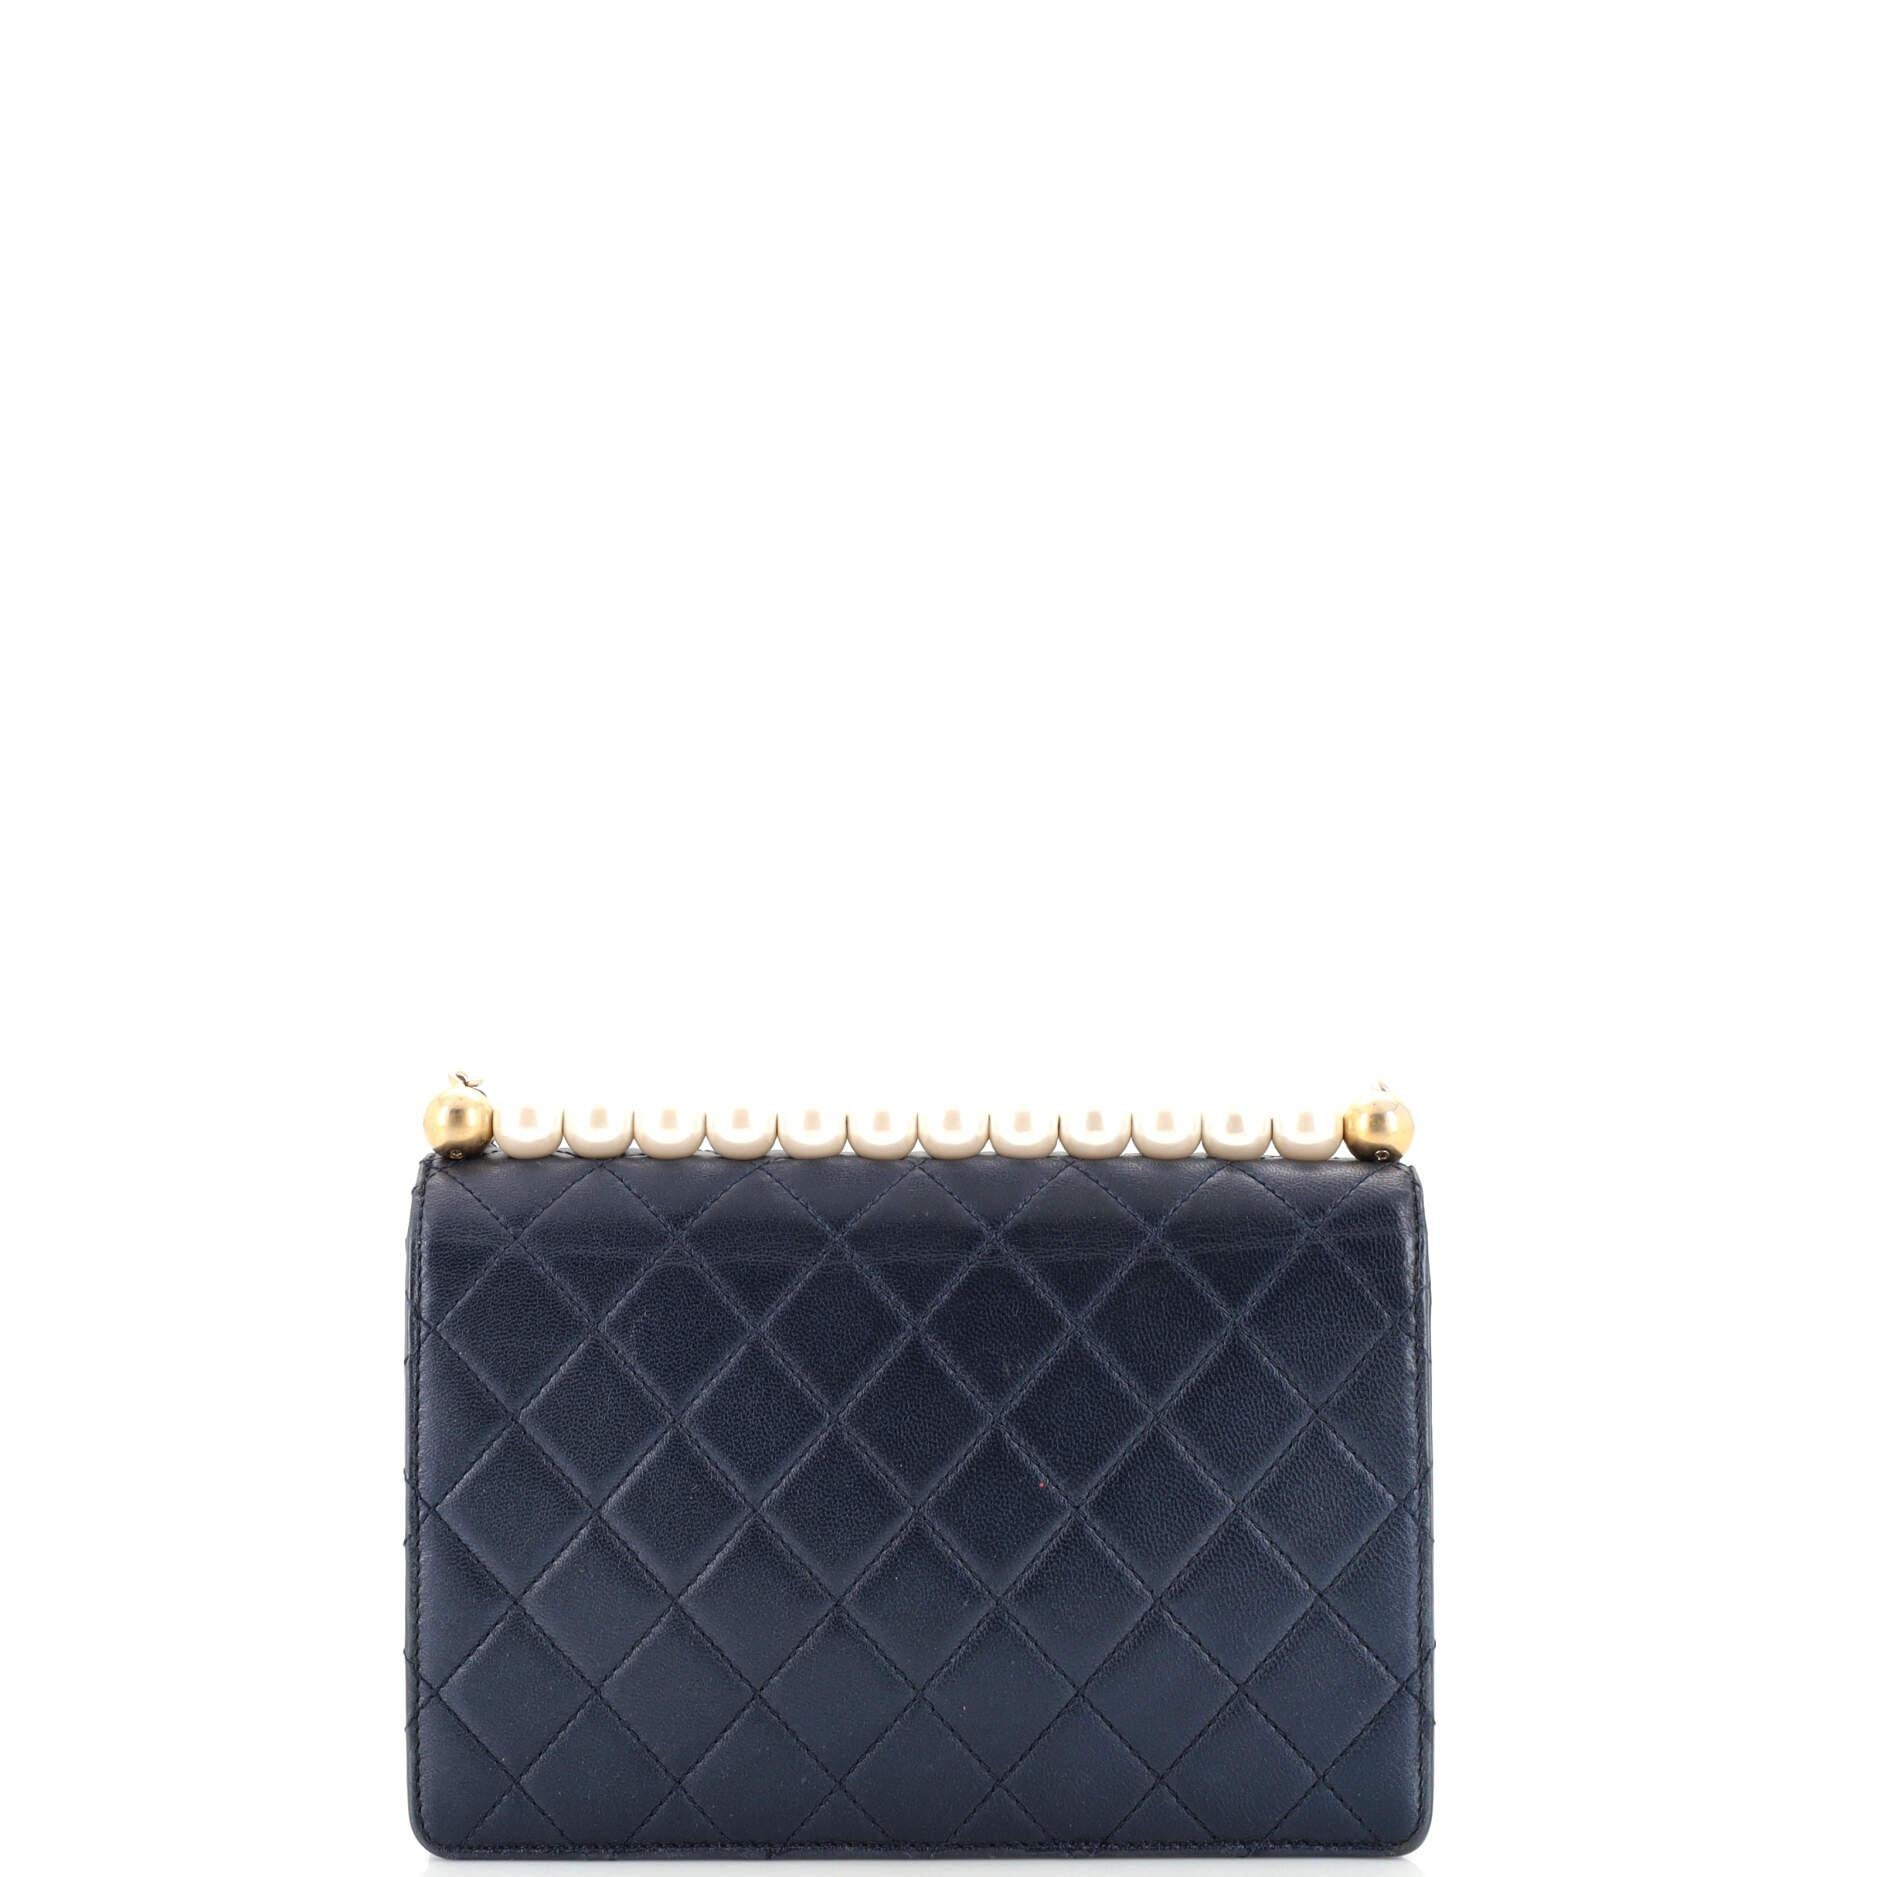 Women's or Men's Chanel Model: Condition: Very good. CChic Pearls Flap Bag Quilted Lambskin Small For Sale